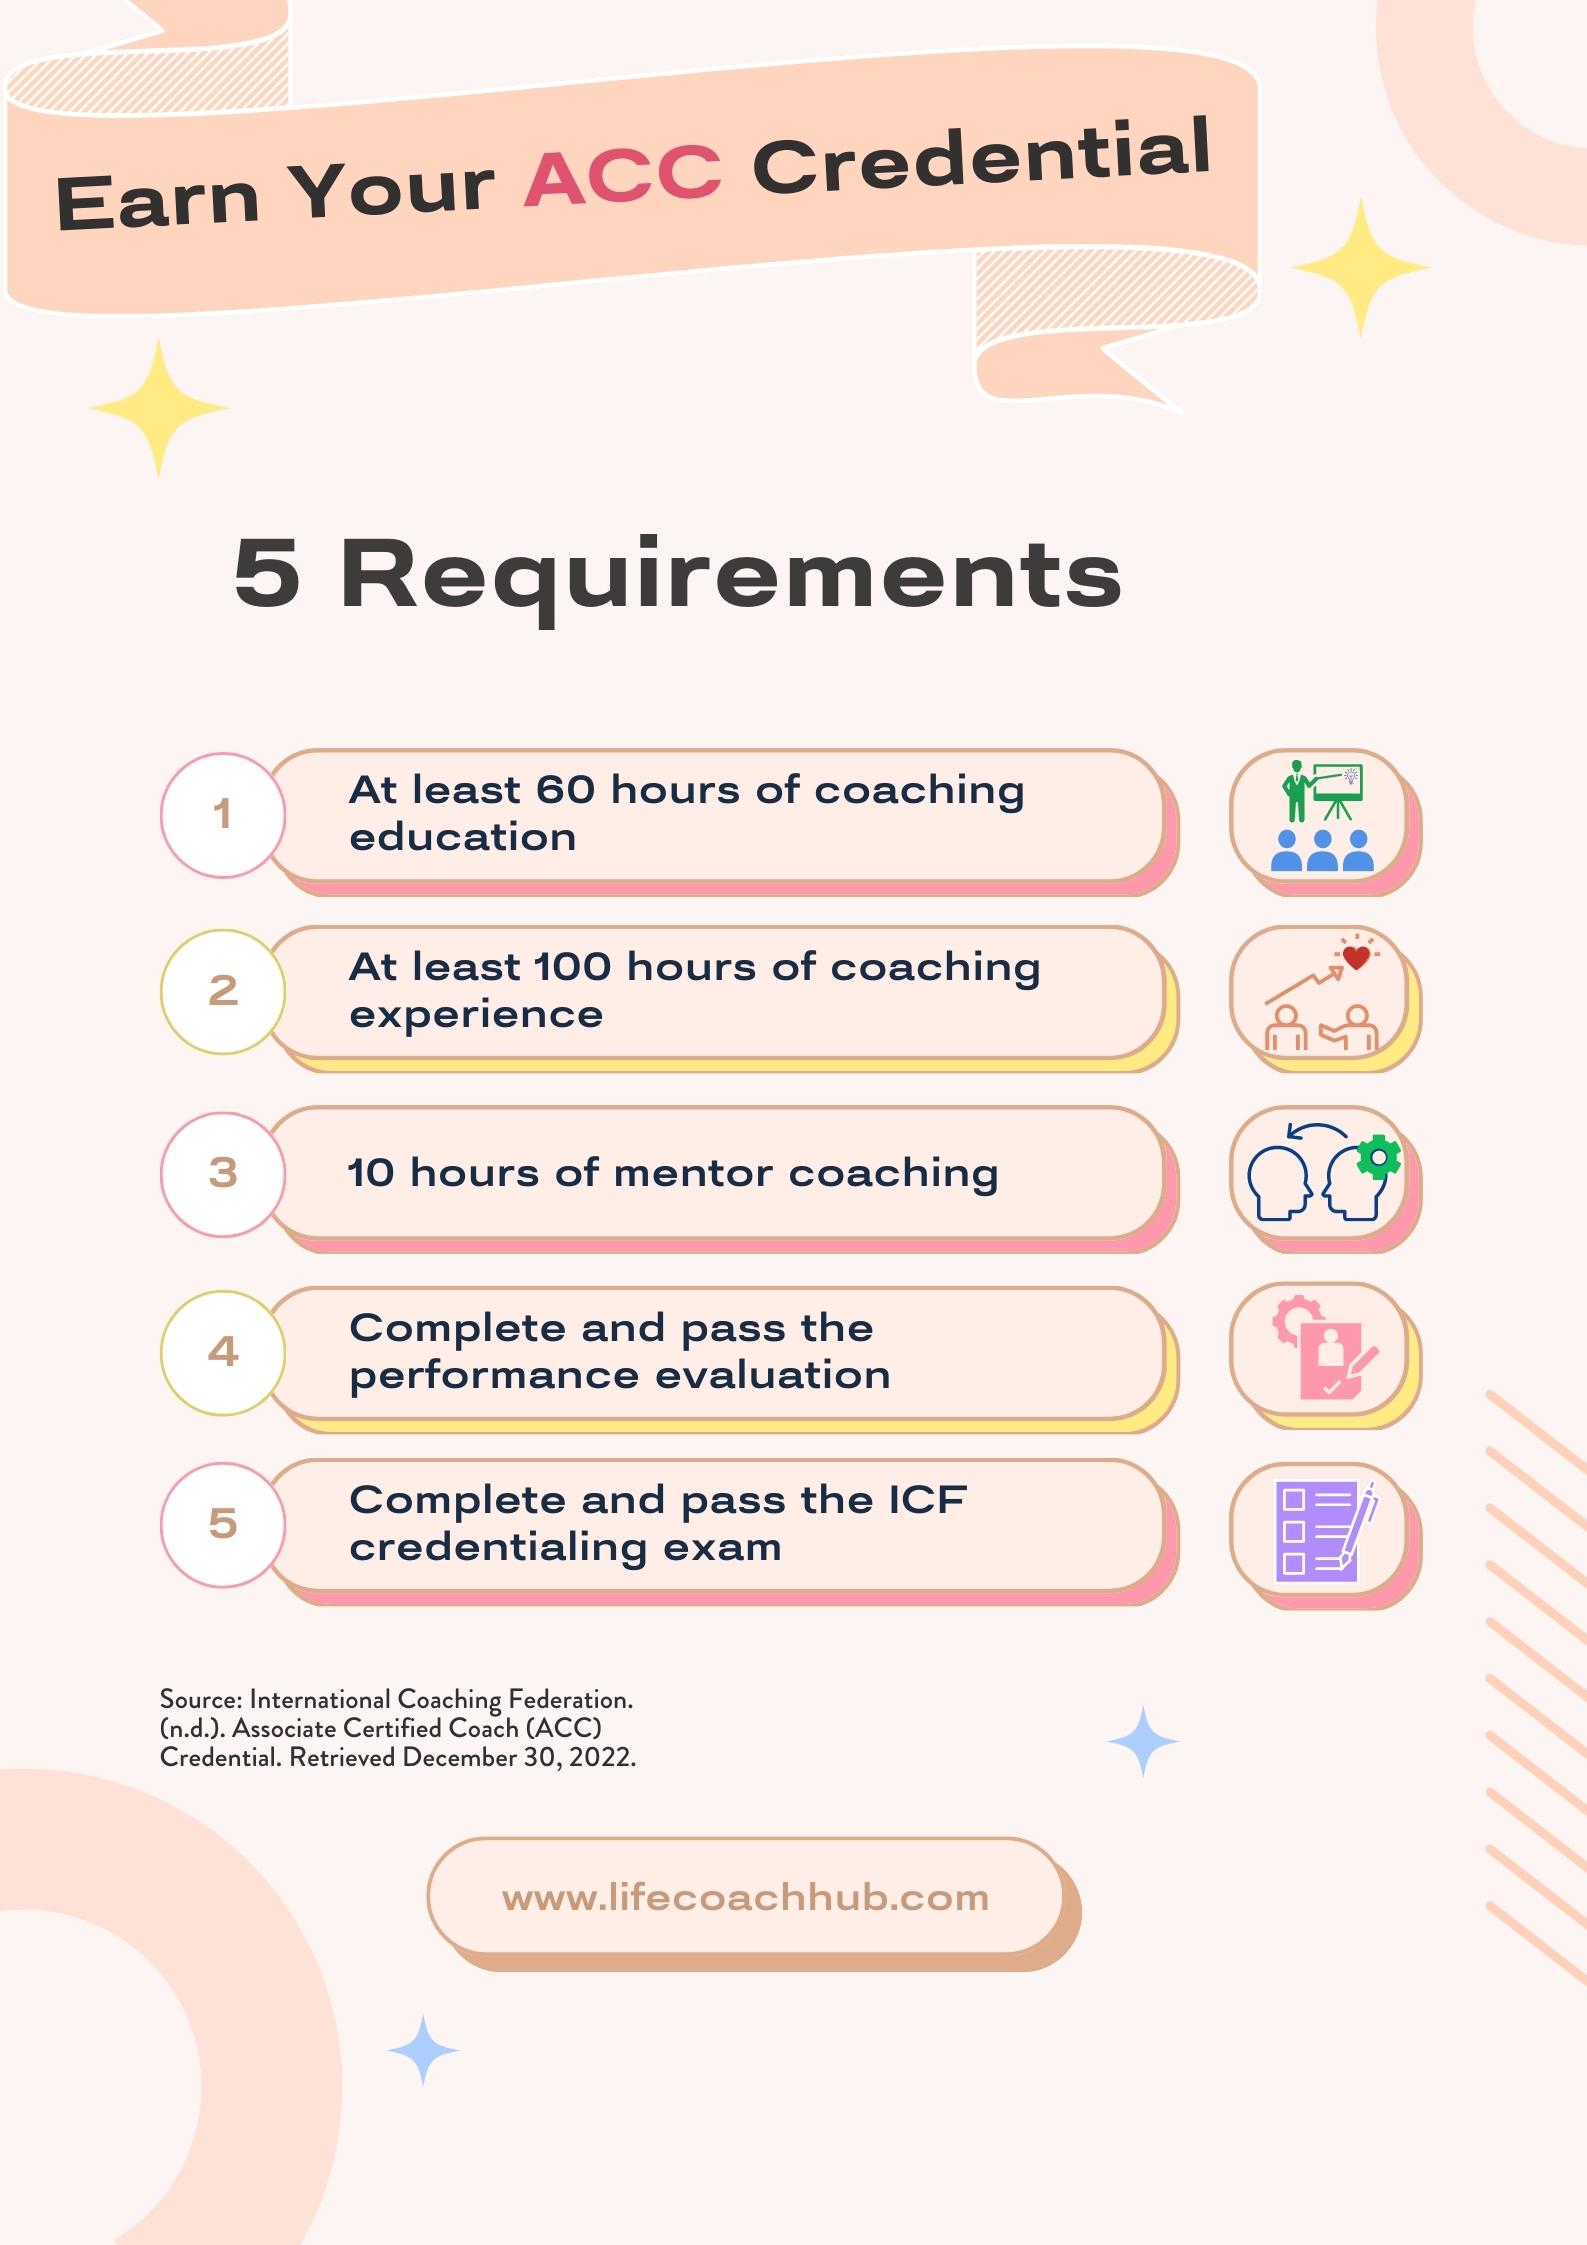 Know the 5 requirements to get your ACC credential